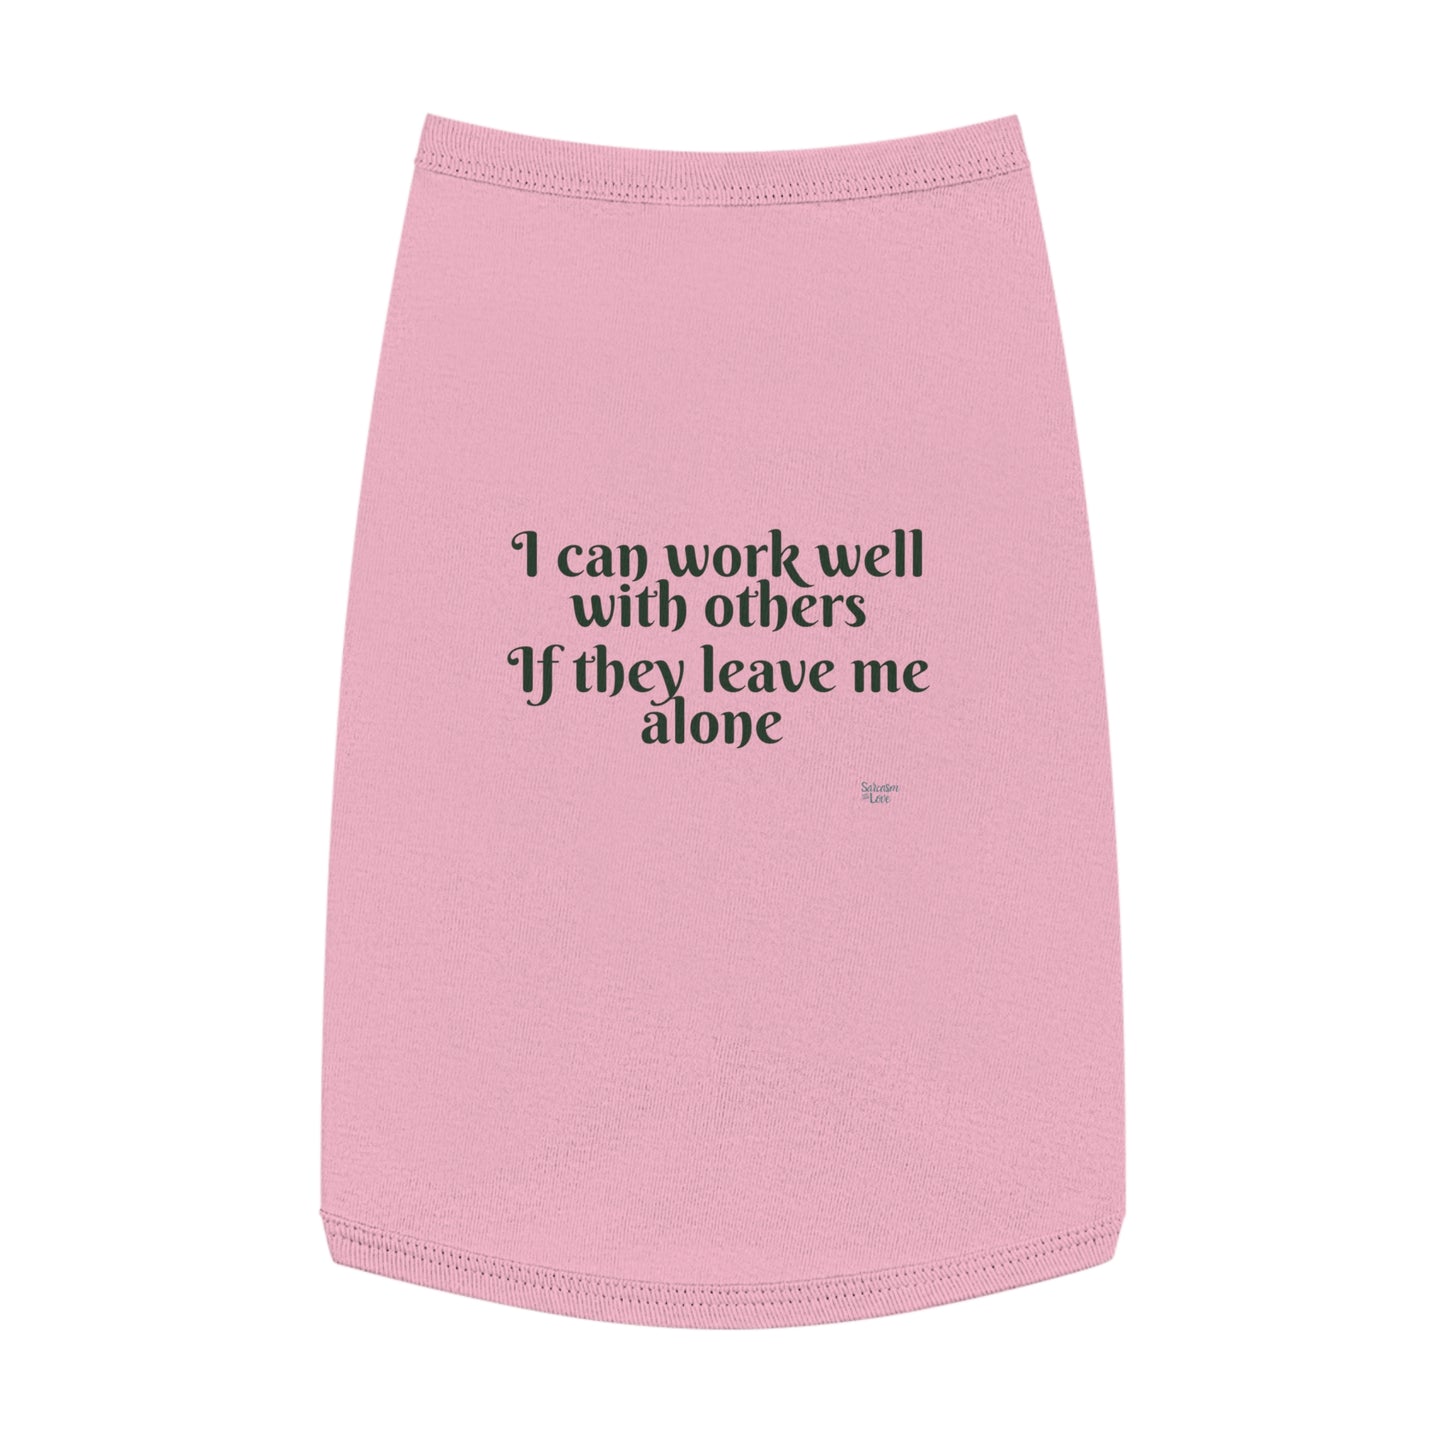 I Can Work Well with Others If Others Leave Me Alone Pet Tank Top - Embrace Your Pet's Independent Spirit